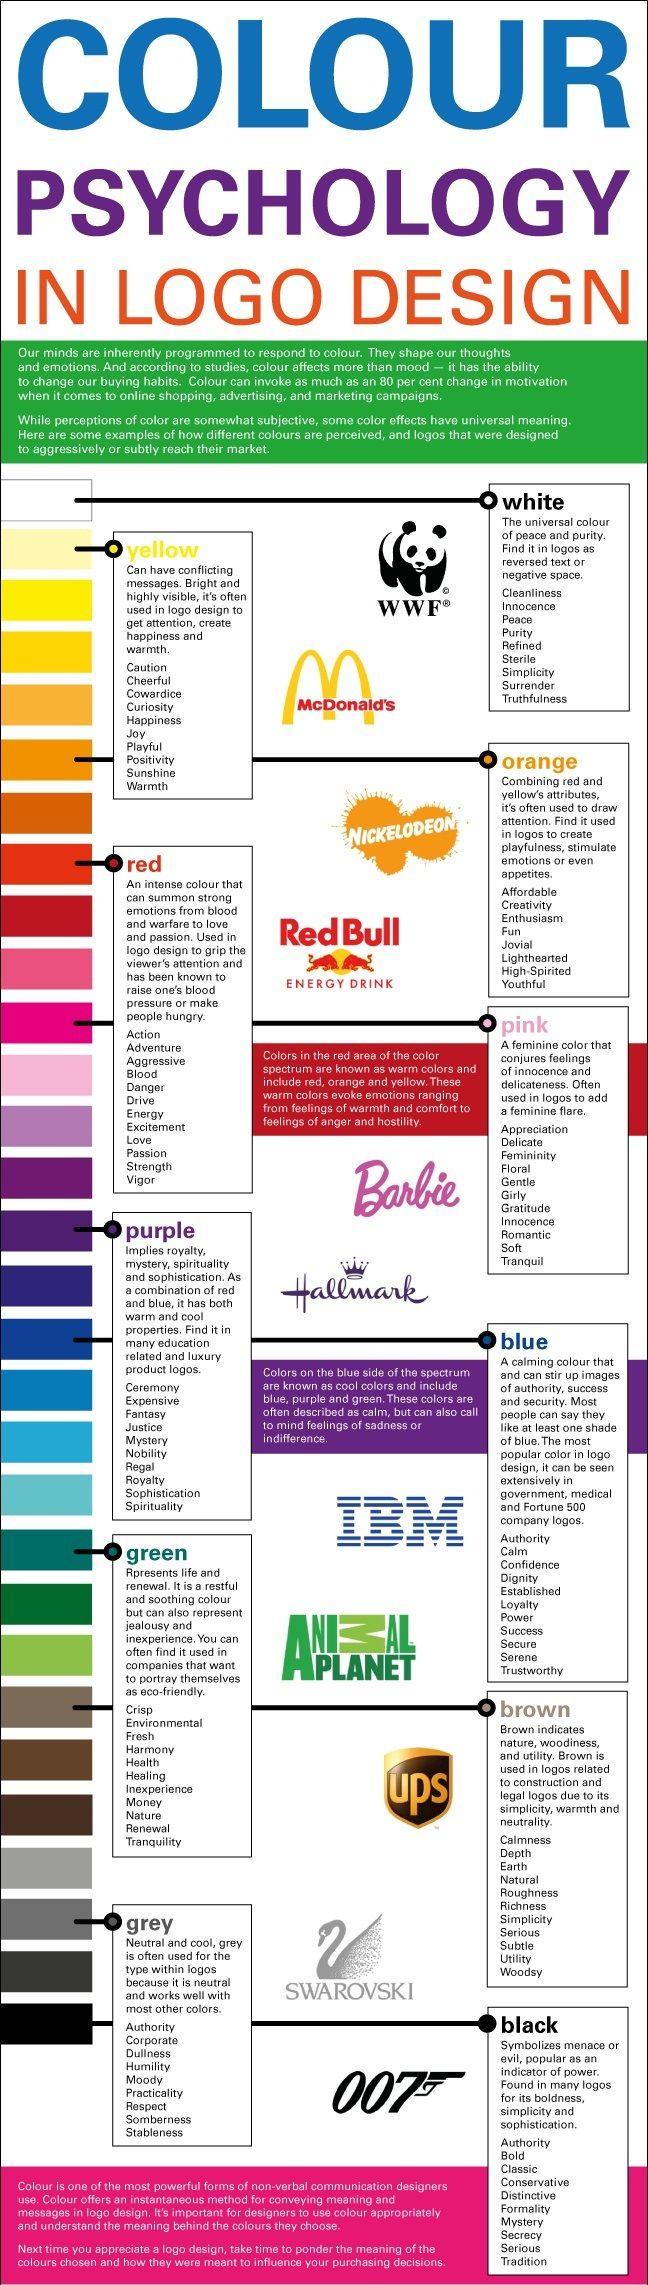 Purple and Organge Company Logo - Color Psychology: What Do Your Brand Colors Say About You?